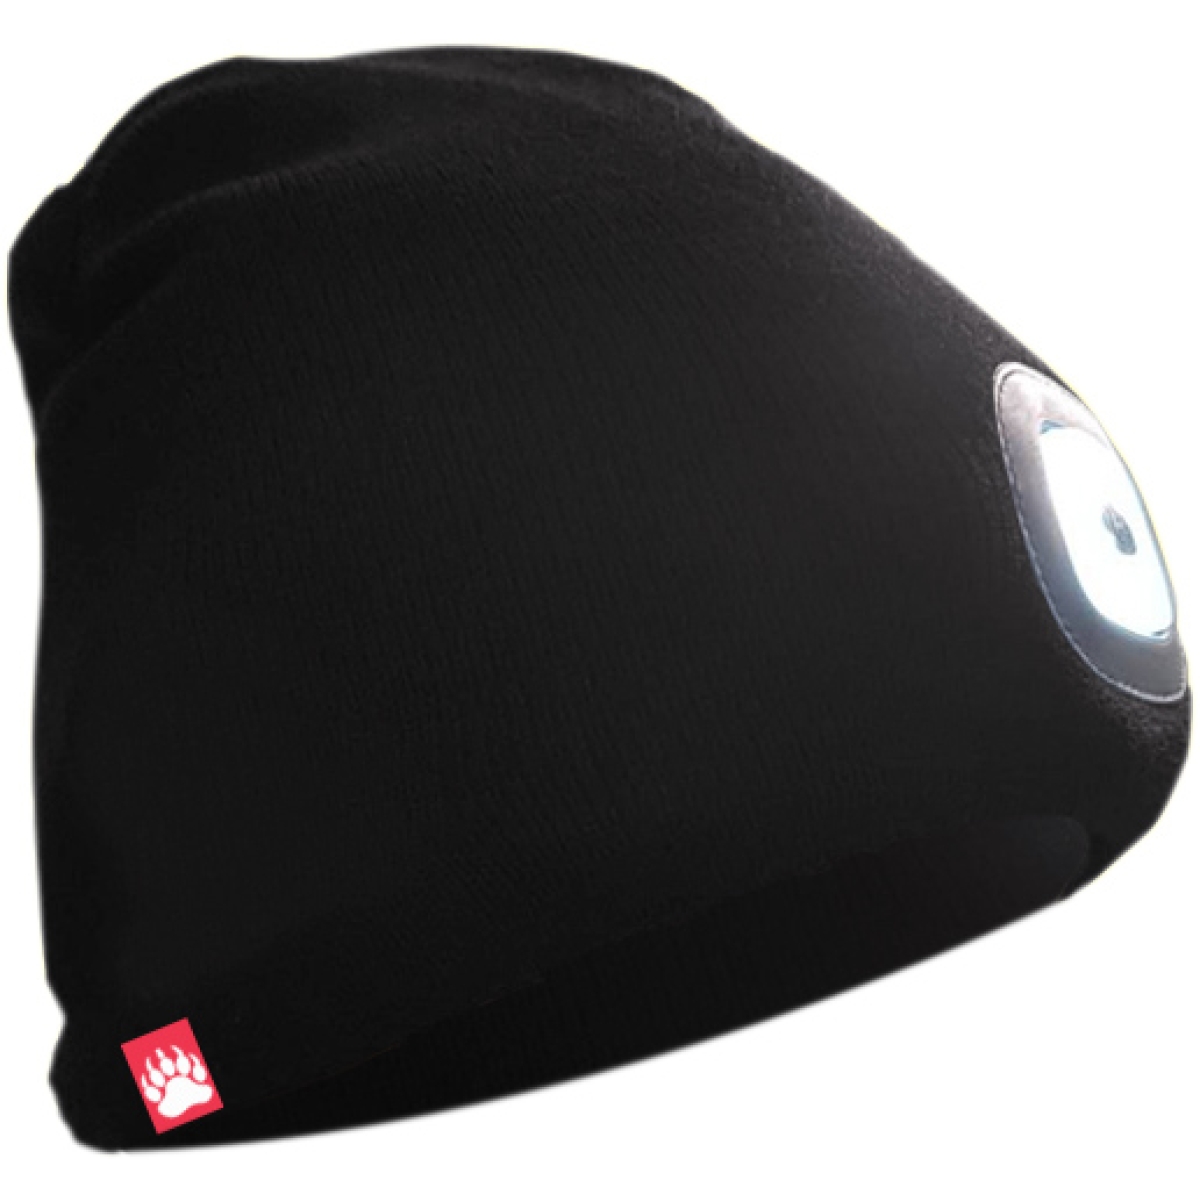 Grizzly Beanie with Headlight LED Worklight